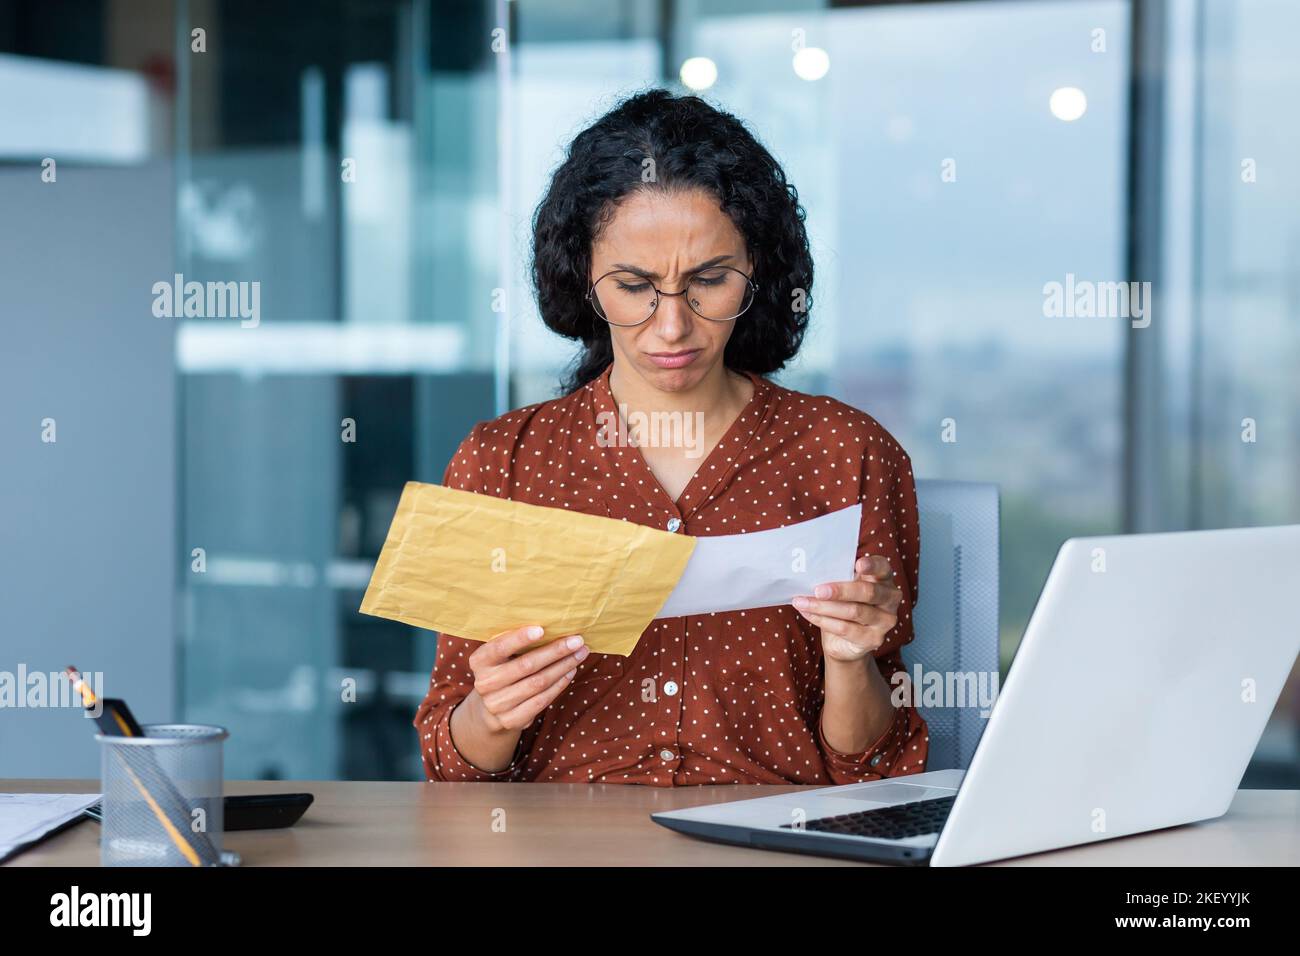 Dissatisfied and upset businesswoman received letter in envelope, depressed latin american businesswoman reading notification message, at work inside office with laptop. Stock Photo